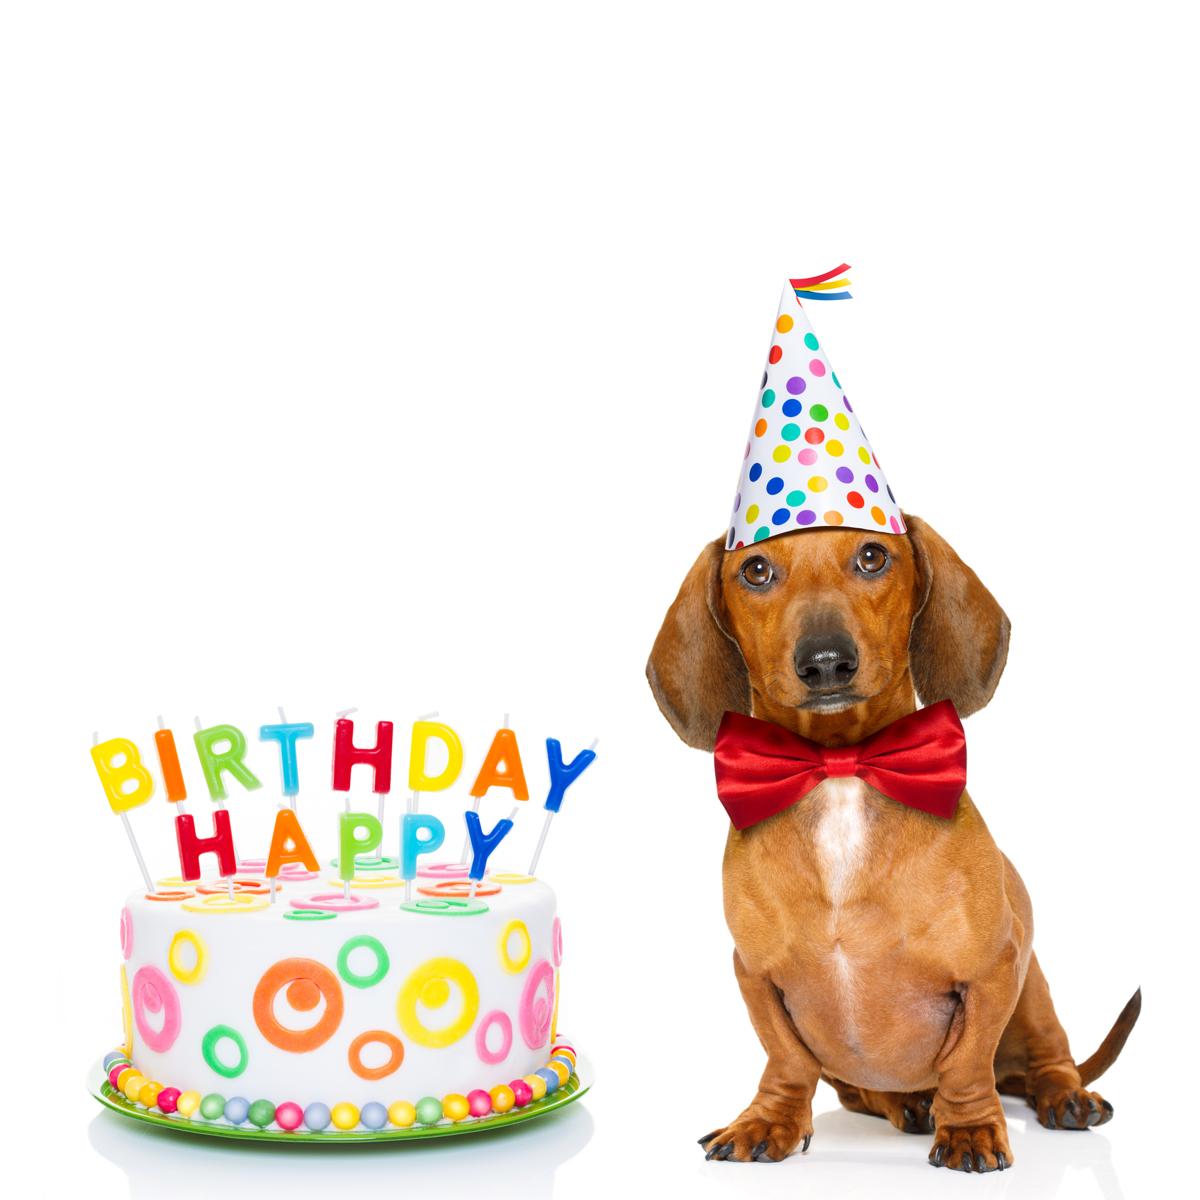 Albums 93+ Wallpaper Happy Birthday From The Dogs Images Excellent